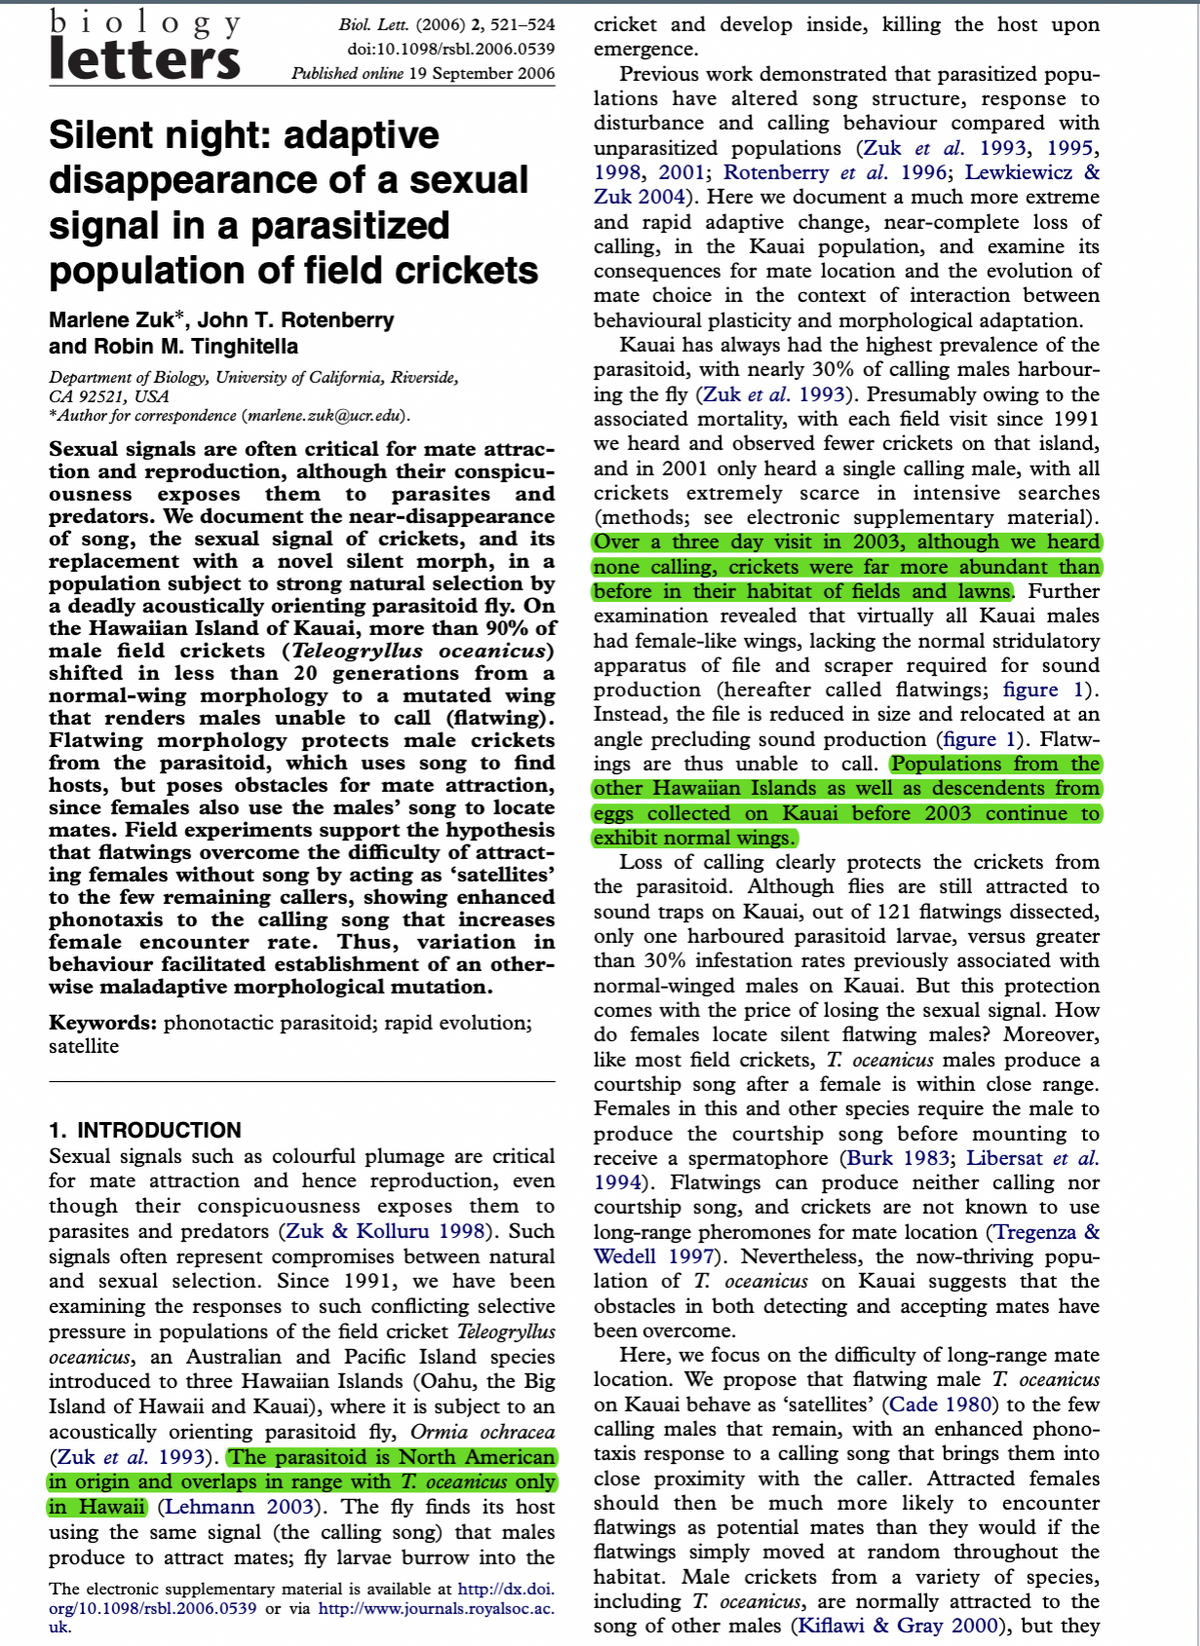 biology
letters
Biol. Lett. (2006) 2, 521-524
doi:10.1098/rsbl.2006.0539
Published online 19 September 2006
Silent night: adaptive
disappearance of a sexual
signal in a parasitized
population of field crickets
Marlene Zuk*, John T. Rotenberry
and Robin M. Tinghitella
Department of Biology, University of California, Riverside,
CA 92521, USA
* Author for correspondence (marlene.zuk@ucr.edu).
Sexual signa re often critical for mat attrac-
tion and reproduction, although their conspicu-
ousness exposes them to parasites and
predators. We document the near-disappearance
of song, the sexual signal of crickets, and its
replacement with a novel silent morph, in a
population subject to strong natural selection by
a deadly acoustically orienting parasitoid fly. On
the Hawaiian Island of Kauai, more than 90% of
male field crickets (Teleogryllus oceanicus)
shifted in less than 20 generations from a
normal-wing morphology to a mutated wing
that renders males unable to call (flatwing).
Flatwing morphology protects male crickets
from the parasitoid, which uses song to find
hosts, but poses obstacles for mate attraction,
since females also use the males' song to locate
mates. Field experiments support the hypothesis
that flatwings overcome the difficulty of attract-
ing females without song by acting as ‘satellites’
to the few remaining callers, showing enhanced
phonotaxis to the calling song that increases
female encounter rate. Thus, variation in
behaviour facilitated establishment of an other-
wise maladaptive morphological mutation.
Keywords: phonotactic parasitoid; rapid evolution;
satellite
1. INTRODUCTION
Sexual signals such as colourful plumage are critical
for mate attraction and hence reproduction, even
though their conspicuousness exposes them to
parasites and predators (Zuk & Kolluru 1998). Such
signals often represent compromises between natural
and sexual selection. Since 1991, we have been
examining the responses to such conflicting selective
pressure in populations of the field cricket Teleogryllus
oceanicus, an Australian and Pacific Island species
introduced to three Hawaiian Islands (Oahu, the Big
Island of Hawaii and Kauai), where it is subject to an
acoustically orienting parasitoid fly, Ormia ochracea
(Zuk et al. 1993). The parasitoid is North American
in origin and overlaps in range with T. oceanicus only
in Hawaii (Lehmann 2003). The fly finds its host
using the same signal (the calling song) that males
produce to attract mates; fly larvae burrow into the
The electronic supplementary material is available at http://dx.doi.
org/10.1098/rsbl.2006.0539 or via http://www.journals.royalsoc.ac.
uk.
cricket and develop inside, killing the host upon
emergence.
Previous work demonstrated that parasitized popu-
lations have altered song structure, response to
disturbance and calling behaviour compared with
unparasitized populations (Zuk et al. 1993, 1995,
1998, 2001; Rotenberry et al. 1996; Lewkiewicz &
Zuk 2004). Here we document a much more extreme
and rapid adaptive change, near-complete loss of
calling, in the Kauai population, and examine its
consequences for mate location and the evolution of
mate choice in the context of interaction between
behavioural plasticity and morphological adaptation.
Kauai has always had the highest prevalence of the
parasitoid, with nearly 30% of calling males harbour-
ing the fly (Zuk et al. 1993). Presumably owing to the
associated mortality, with each field visit since 1991
we heard and observed fewer crickets on that island,
and in 2001 only heard a single calling male, with all
crickets extremely scarce in intensive searches
(methods; see electronic supplementary material).
Over a three day visit in 2003, although we heard
none calling, crickets were far more abundant than
before in their habitat of fields and lawns. Further
examination revealed that virtually all Kauai males
had female-like wings, lacking the normal stridulatory
apparatus of file and scraper required for sound
production (hereafter called flatwings; figure 1).
Instead, the file is reduced in size and relocated at an
angle precluding sound production (figure 1). Flatw-
ings are thus unable to call. Populations from the
other Hawaiian Islands as well as descendents from
eggs collected on Kauai before 2003 continue to
exhibit normal wings.
Loss of calling clearly protects the crickets from
the parasitoid. Although flies are still attracted to
sound traps on Kauai, out of 121 flatwings dissected,
only one harboured parasitoid larvae, versus greater
than 30% infestation rates previously associated with
normal-winged males on Kauai. But this protection
comes with the price of losing the sexual signal. How
do females locate silent flatwing males? Moreover,
like most field crickets, T. oceanicus males produce a
courtship song after a female is within close range.
Females in this and other species require the male to
produce the courtship song before mounting to
receive a spermatophore (Burk 1983; Libersat et al.
1994). Flatwings can produce neither calling nor
courtship song, and crickets are not known to use
long-range pheromones for mate location (Tregenza &
Wedell 1997). Nevertheless, the now-thriving popu-
lation of T. oceanicus on Kauai suggests that the
obstacles in both detecting and accepting mates have
been overcome.
Here, we focus on the difficulty of long-range mate
location. We propose that flatwing male T. oceanicus
on Kauai behave as 'satellites' (Cade 1980) to the few
calling males that remain, with an enhanced phono-
taxis response to a calling song that brings them into
close proximity with the caller. Attracted females
should then be much more likely to encounter
flatwings as potential mates than they would if the
flatwings simply moved at random throughout the
habitat. Male crickets from a variety of species,
including T. oceanicus, are normally attracted to the
song of other males (Kiflawi & Gray 2000), but they